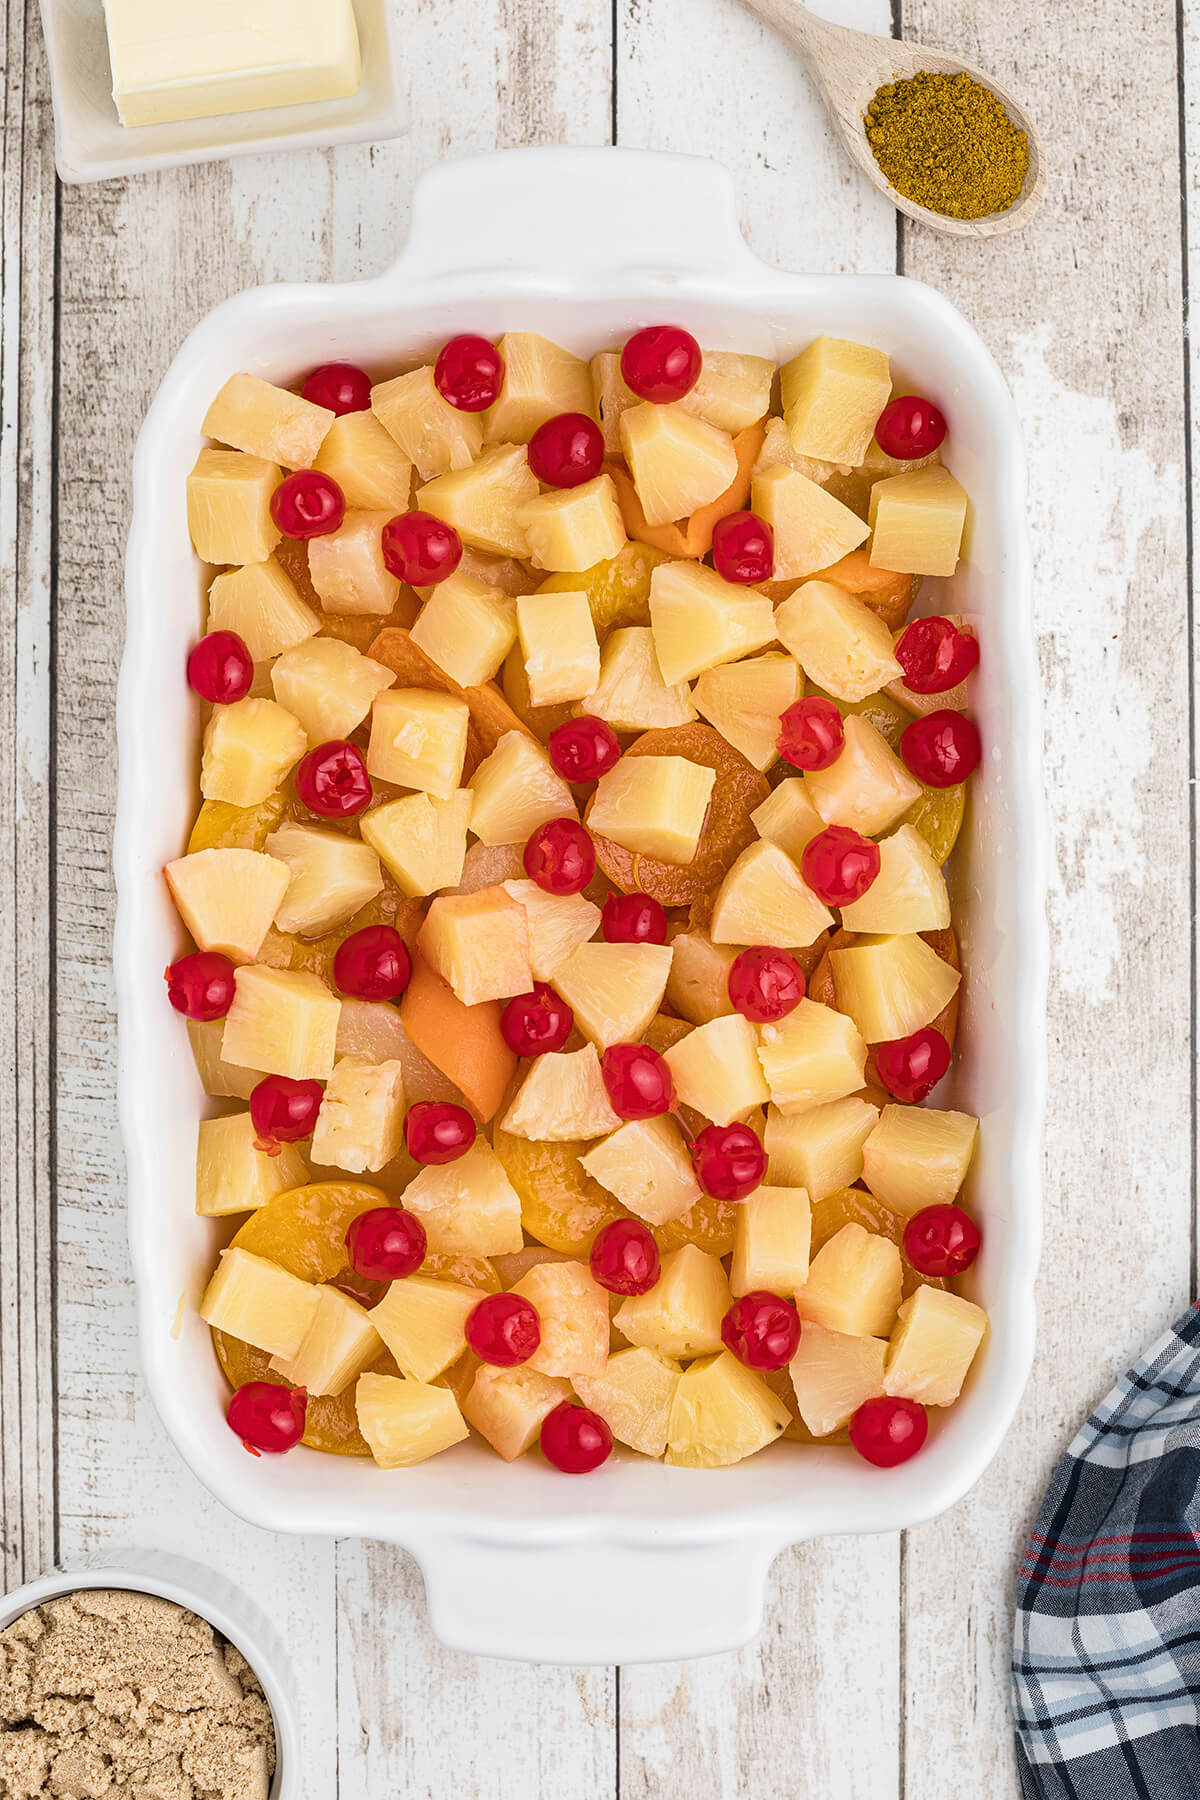 Drained fruit layered in a 9x13 baking dish.